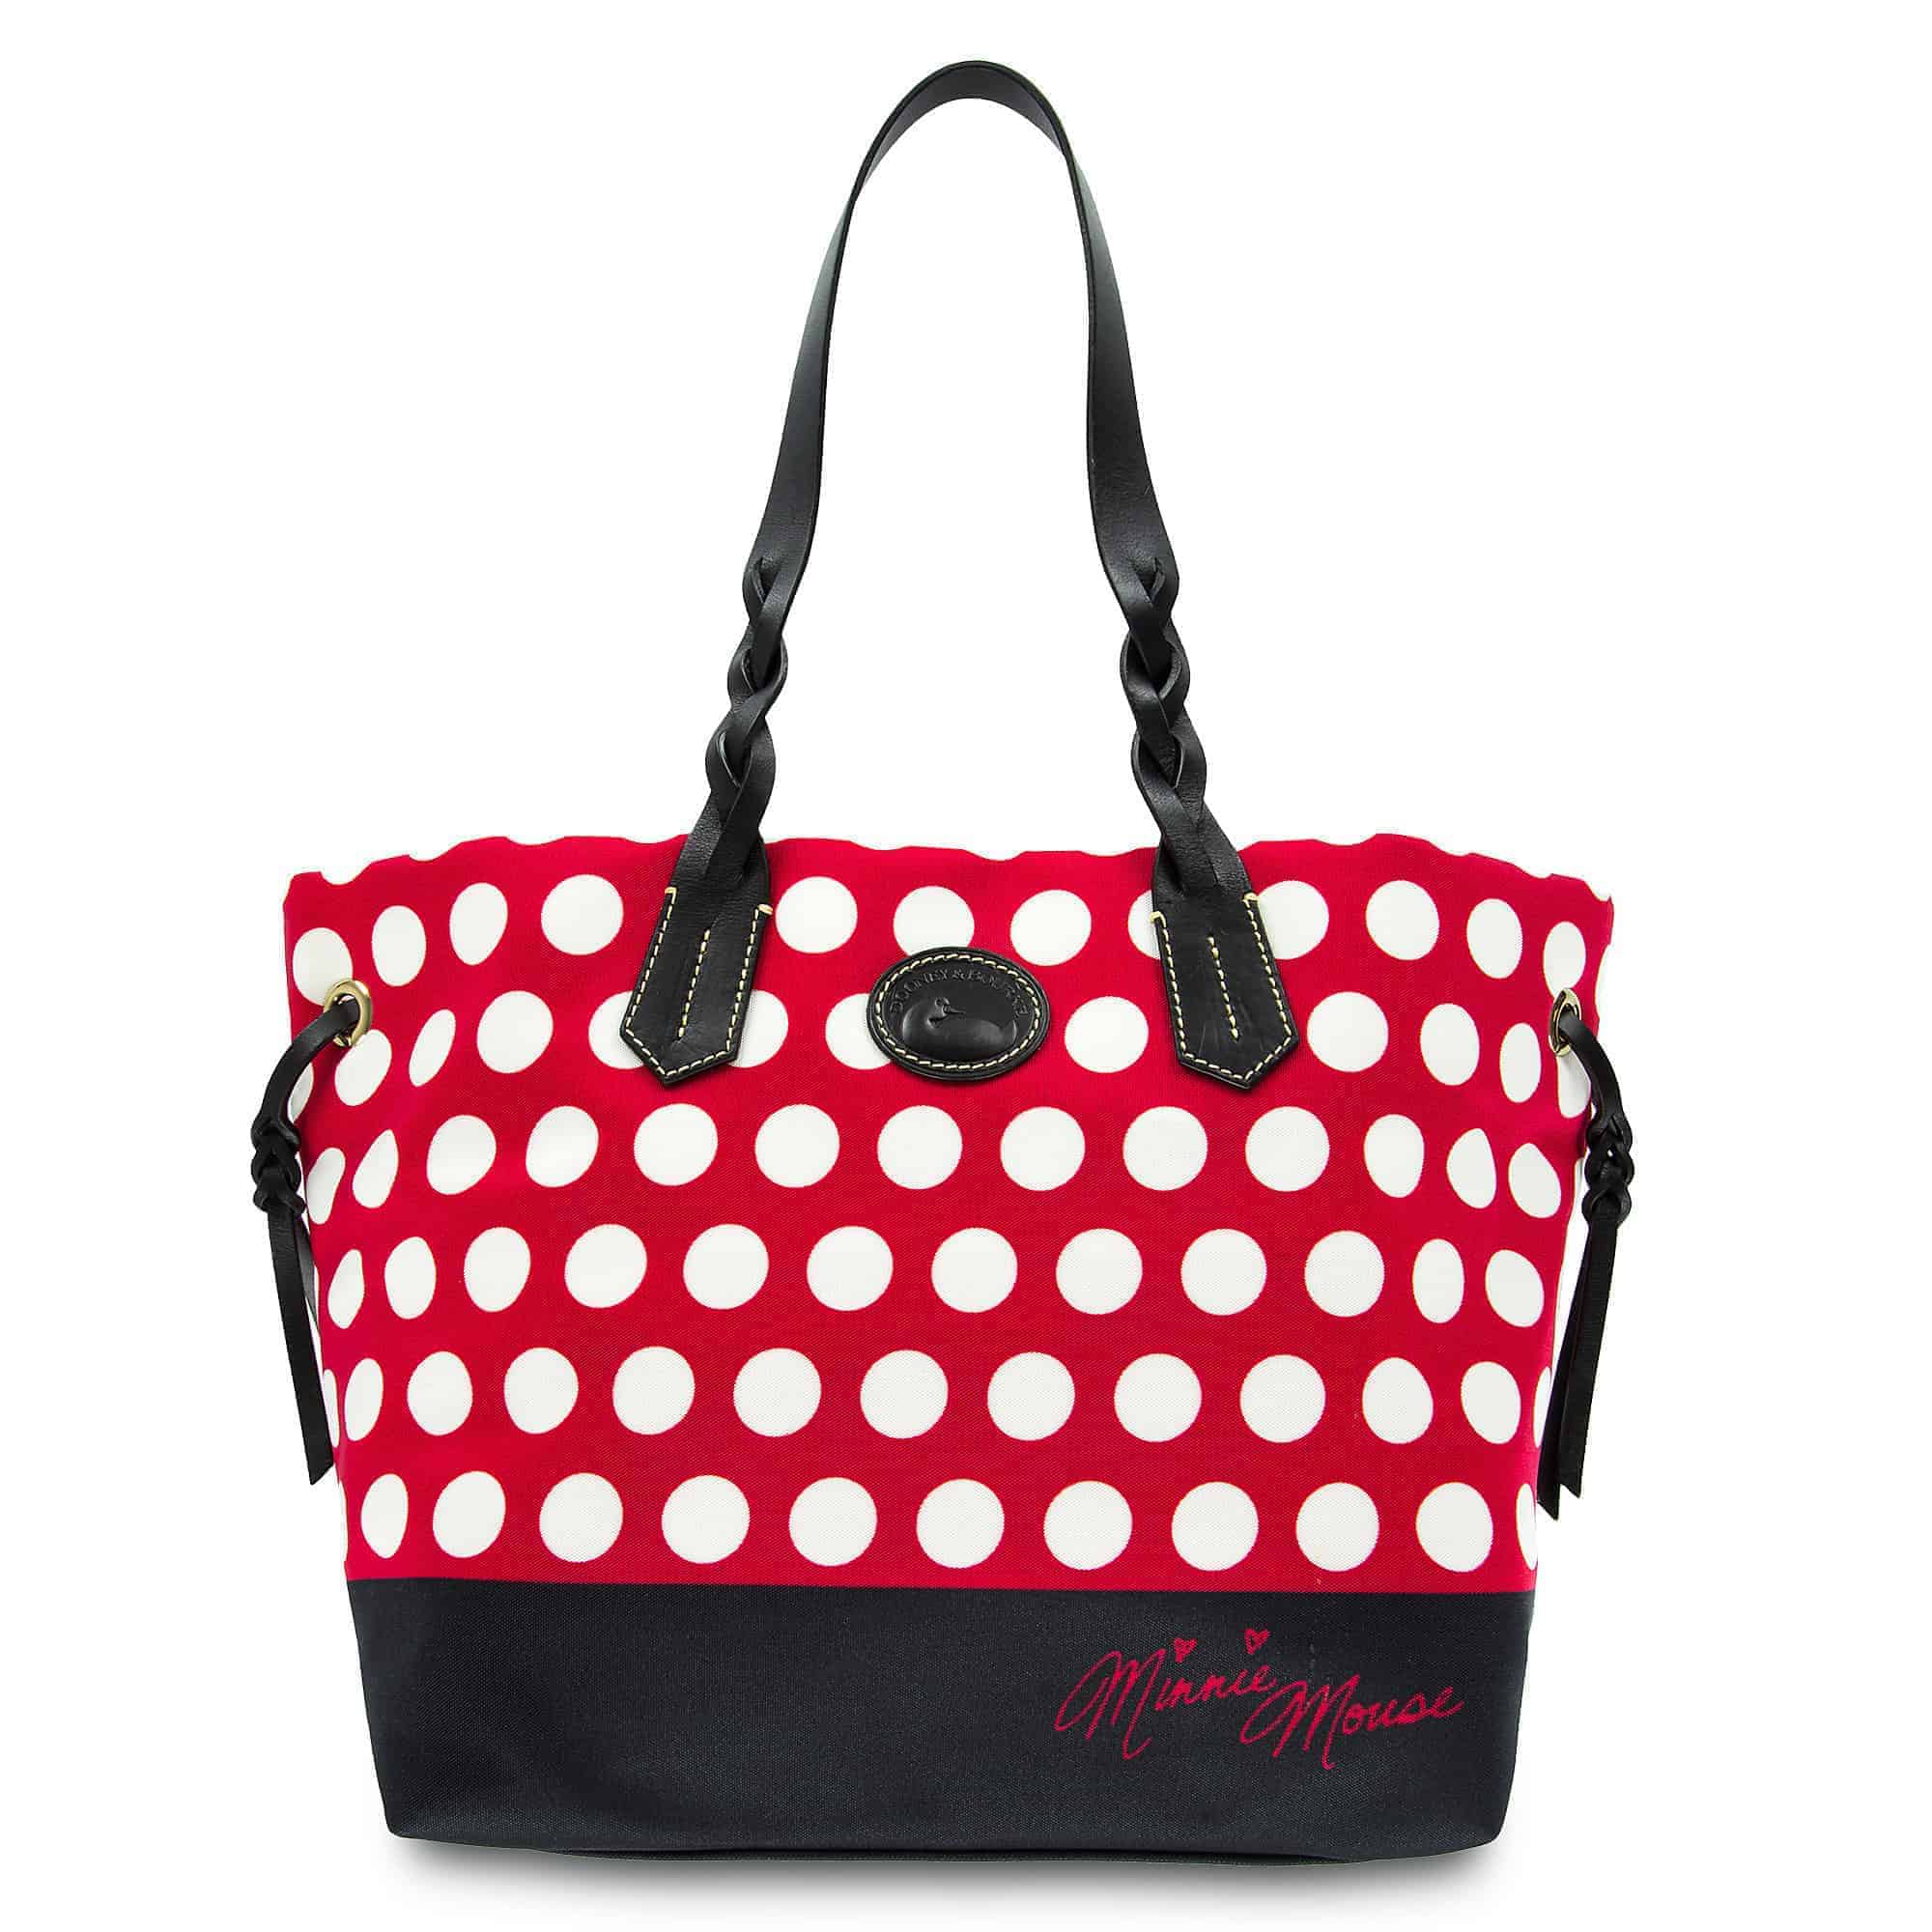 Minnie Mouse Rock the Dots Tote